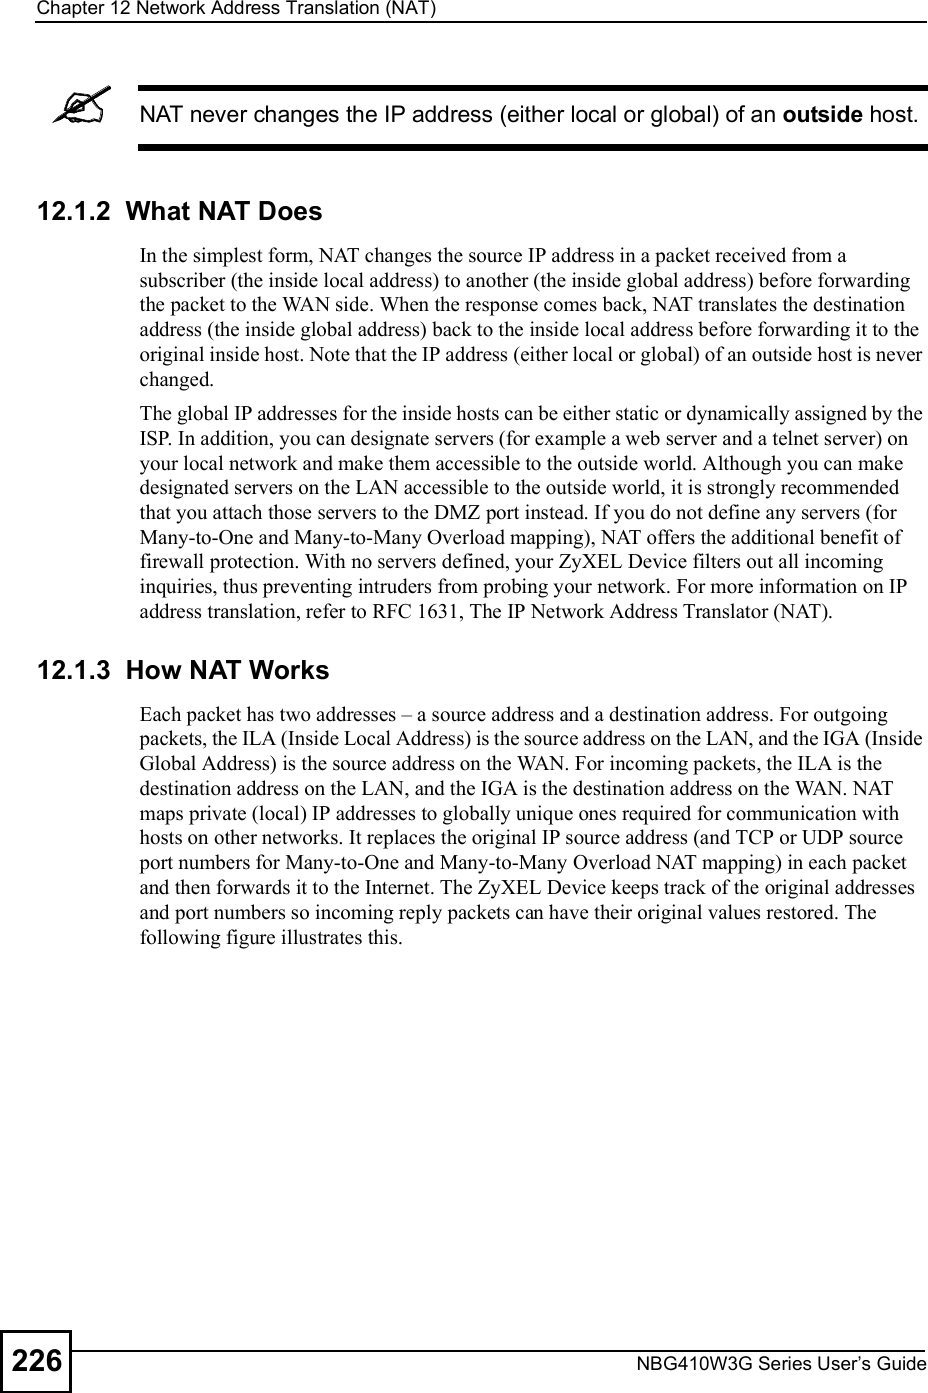 Chapter 12Network Address Translation (NAT)NBG410W3G Series User s Guide226NAT never changes the IP address (either local or global) of an outside host.12.1.2  What NAT DoesIn the simplest form, NAT changes the source IP address in a packet received from a subscriber (the inside local address) to another (the inside global address) before forwarding the packet to the WAN side. When the response comes back, NAT translates the destination address (the inside global address) back to the inside local address before forwarding it to the original inside host. Note that the IP address (either local or global) of an outside host is never changed.The global IP addresses for the inside hosts can be either static or dynamically assigned by the ISP. In addition, you can designate servers (for example a web server and a telnet server) on your local network and make them accessible to the outside world. Although you can make designated servers on the LAN accessible to the outside world, it is strongly recommended that you attach those servers to the DMZ port instead. If you do not define any servers (for Many-to-One and Many-to-Many Overload mapping), NAT offers the additional benefit of firewall protection. With no servers defined, your ZyXEL Device filters out all incoming inquiries, thus preventing intruders from probing your network. For more information on IP address translation, refer to RFC 1631, The IP Network Address Translator (NAT).12.1.3  How NAT WorksEach packet has two addresses % a source address and a destination address. For outgoing packets, the ILA (Inside Local Address) is the source address on the LAN, and the IGA (Inside Global Address) is the source address on the WAN. For incoming packets, the ILA is the destination address on the LAN, and the IGA is the destination address on the WAN. NAT maps private (local) IP addresses to globally unique ones required for communication with hosts on other networks. It replaces the original IP source address (and TCP or UDP source port numbers for Many-to-One and Many-to-Many Overload NAT mapping) in each packet and then forwards it to the Internet. The ZyXEL Device keeps track of the original addresses and port numbers so incoming reply packets can have their original values restored. The following figure illustrates this.